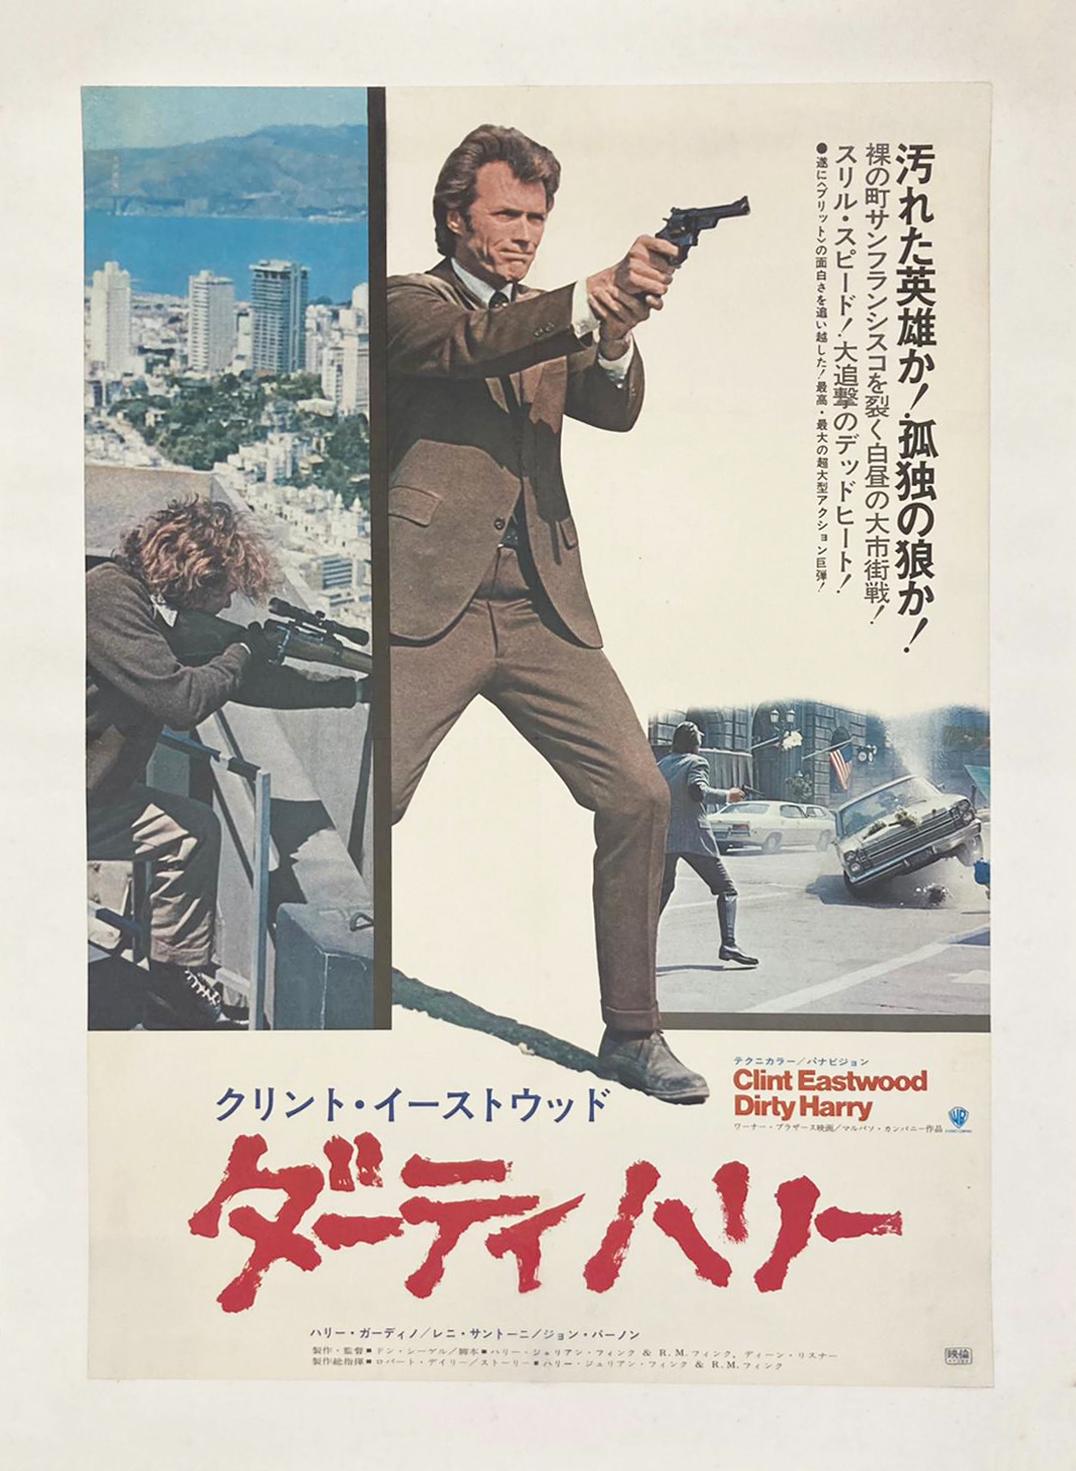 Unknown Figurative Print - Clint Eastwood Dirty Harry Original Vintage B2 Japanese Poster 1971